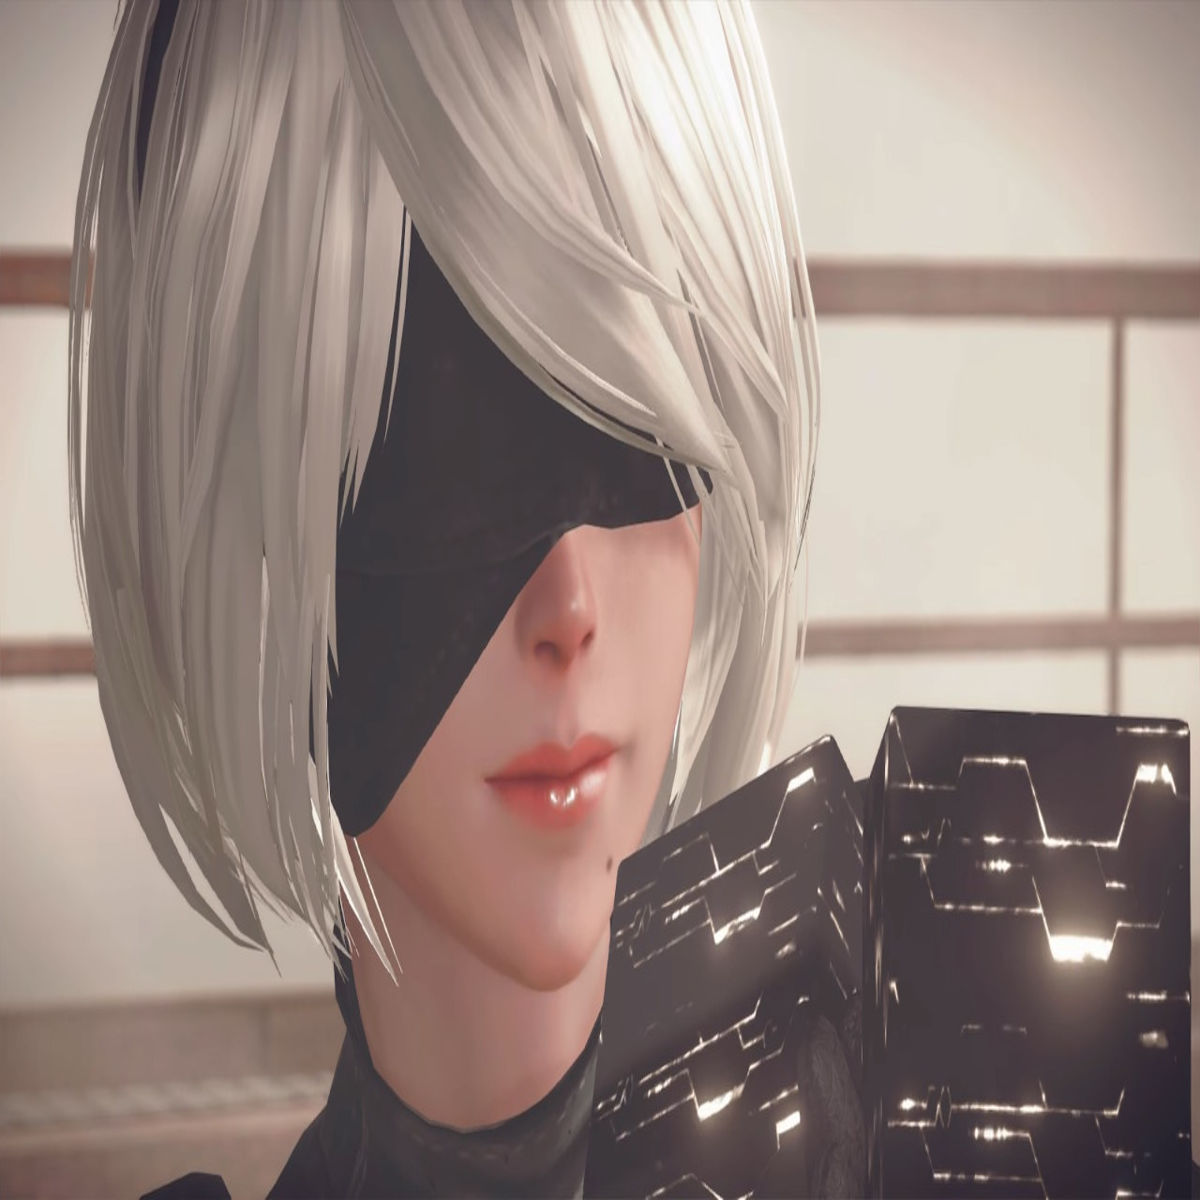 Nier: Automata Ver1.1a anime adaptation gets a January release date and a  first proper trailer